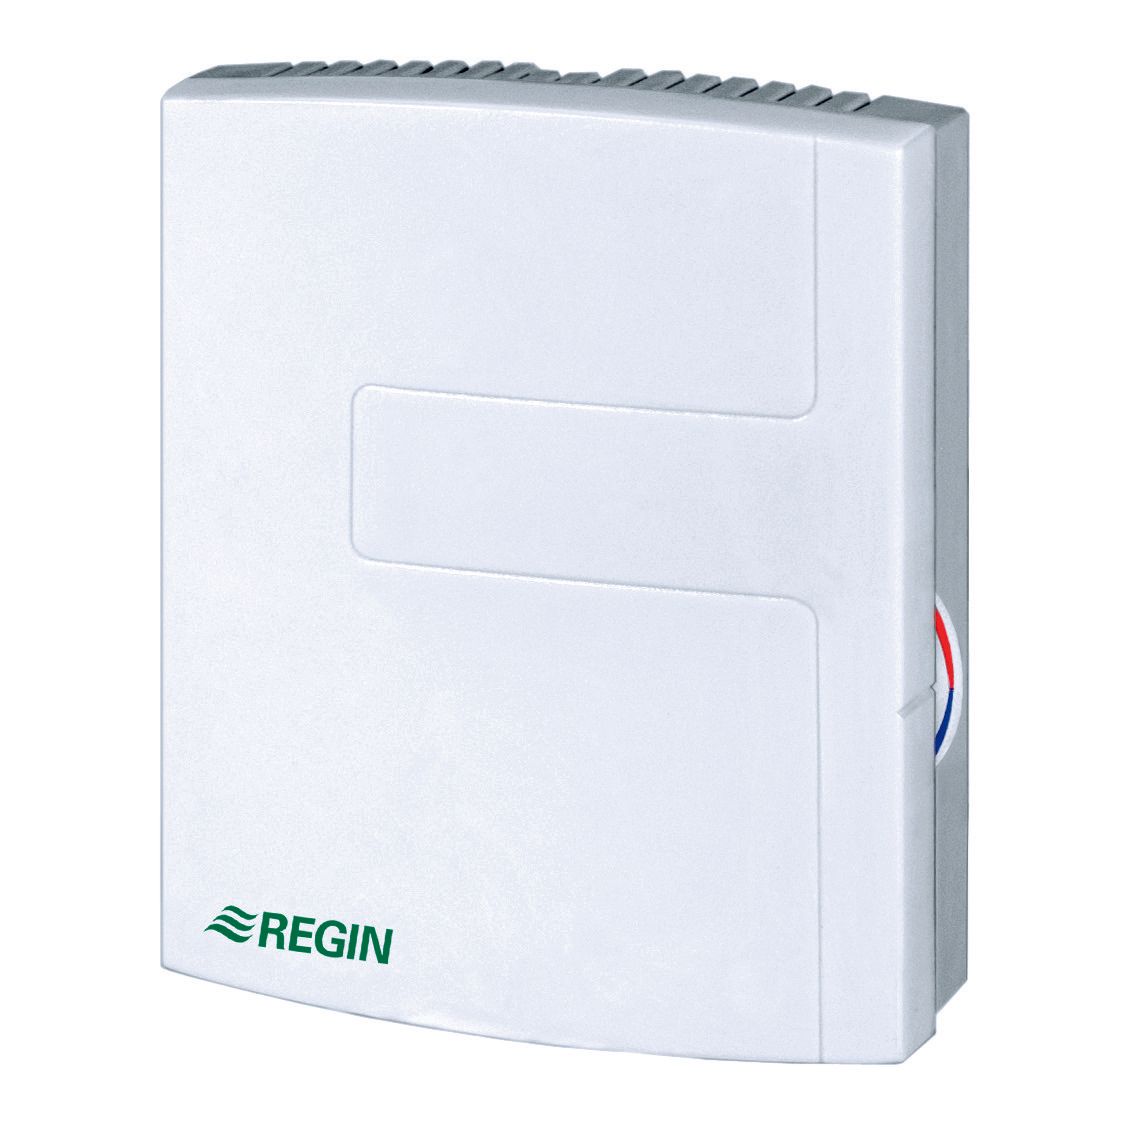 STAND ALONE UNIVERSAL ROOM CONTROLLERS